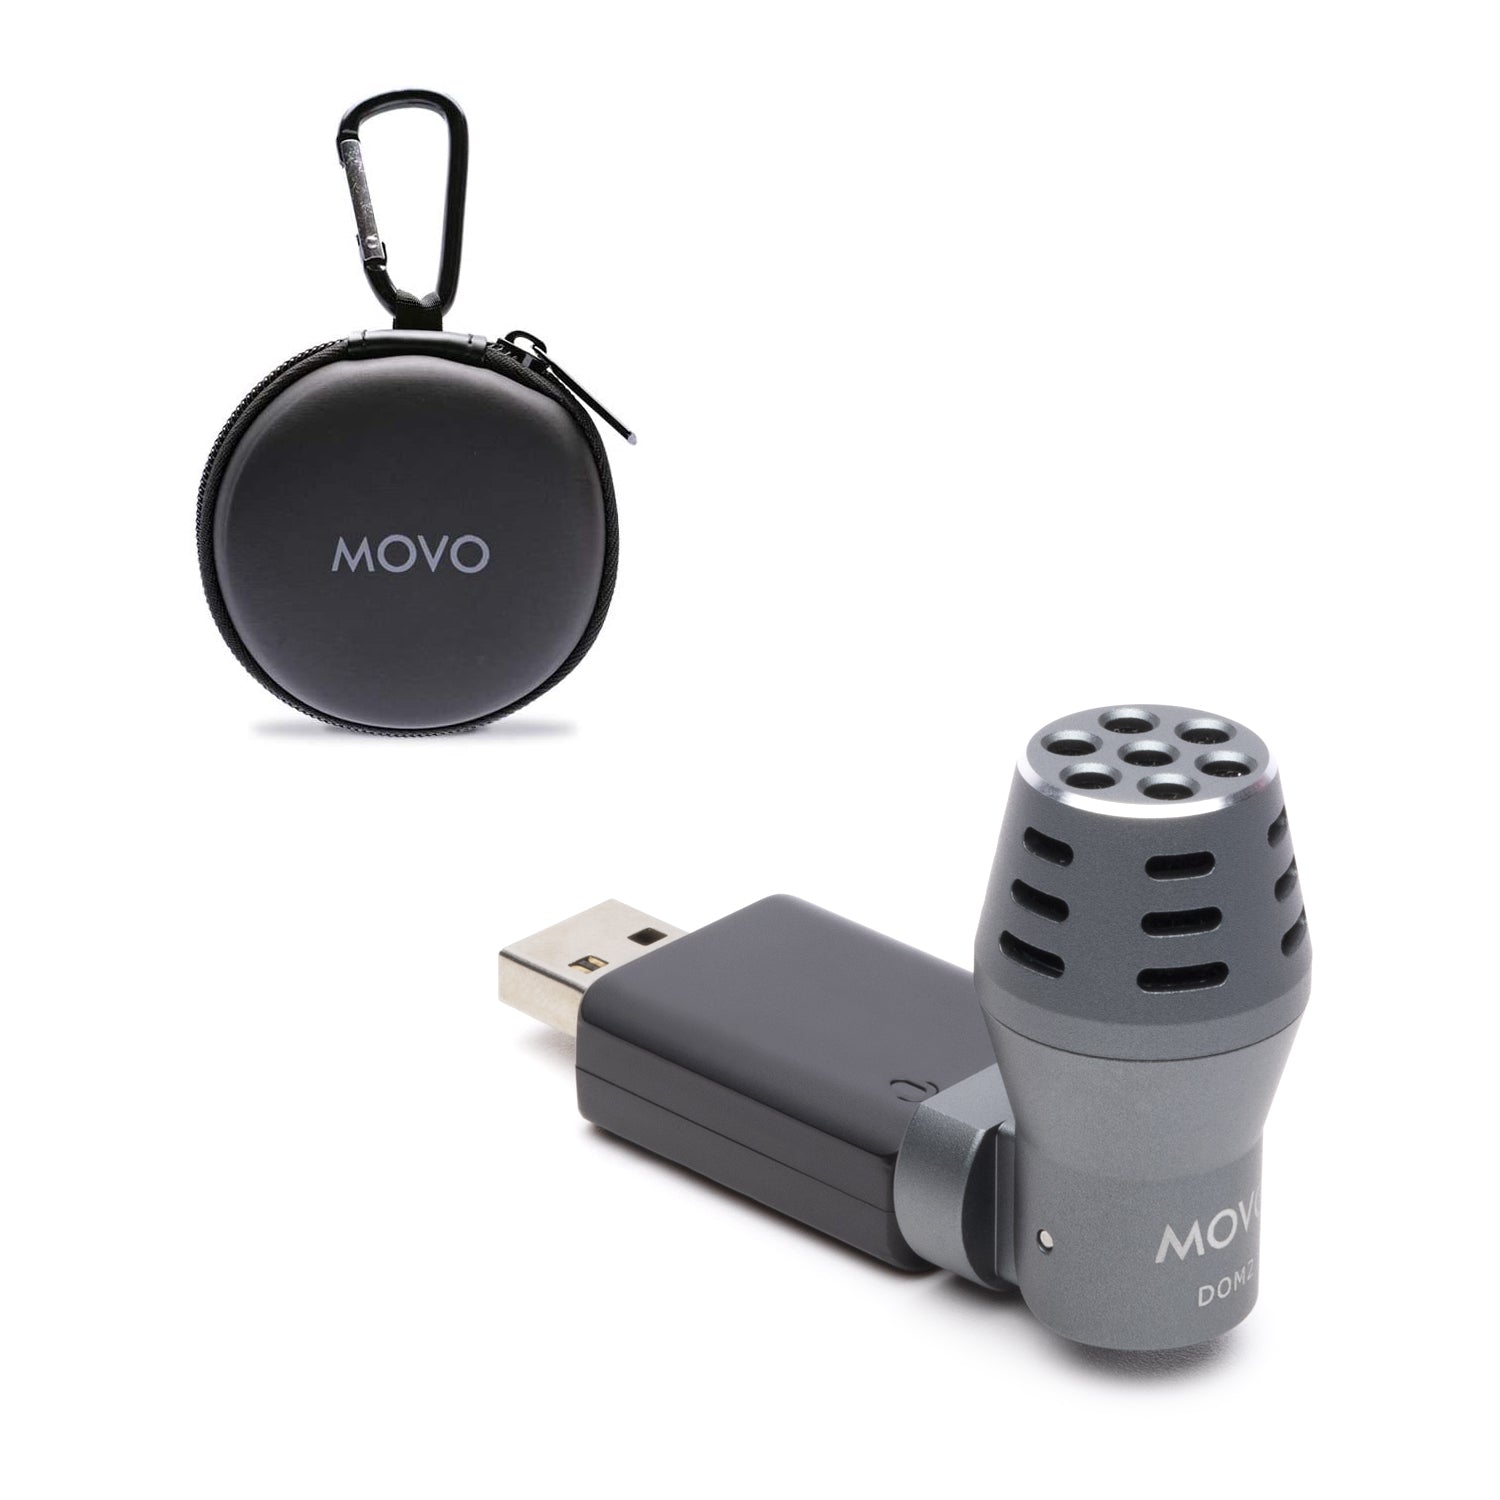 DOM2-USB | Mini Omnidirectional Microphone for PC and Mac | Movo